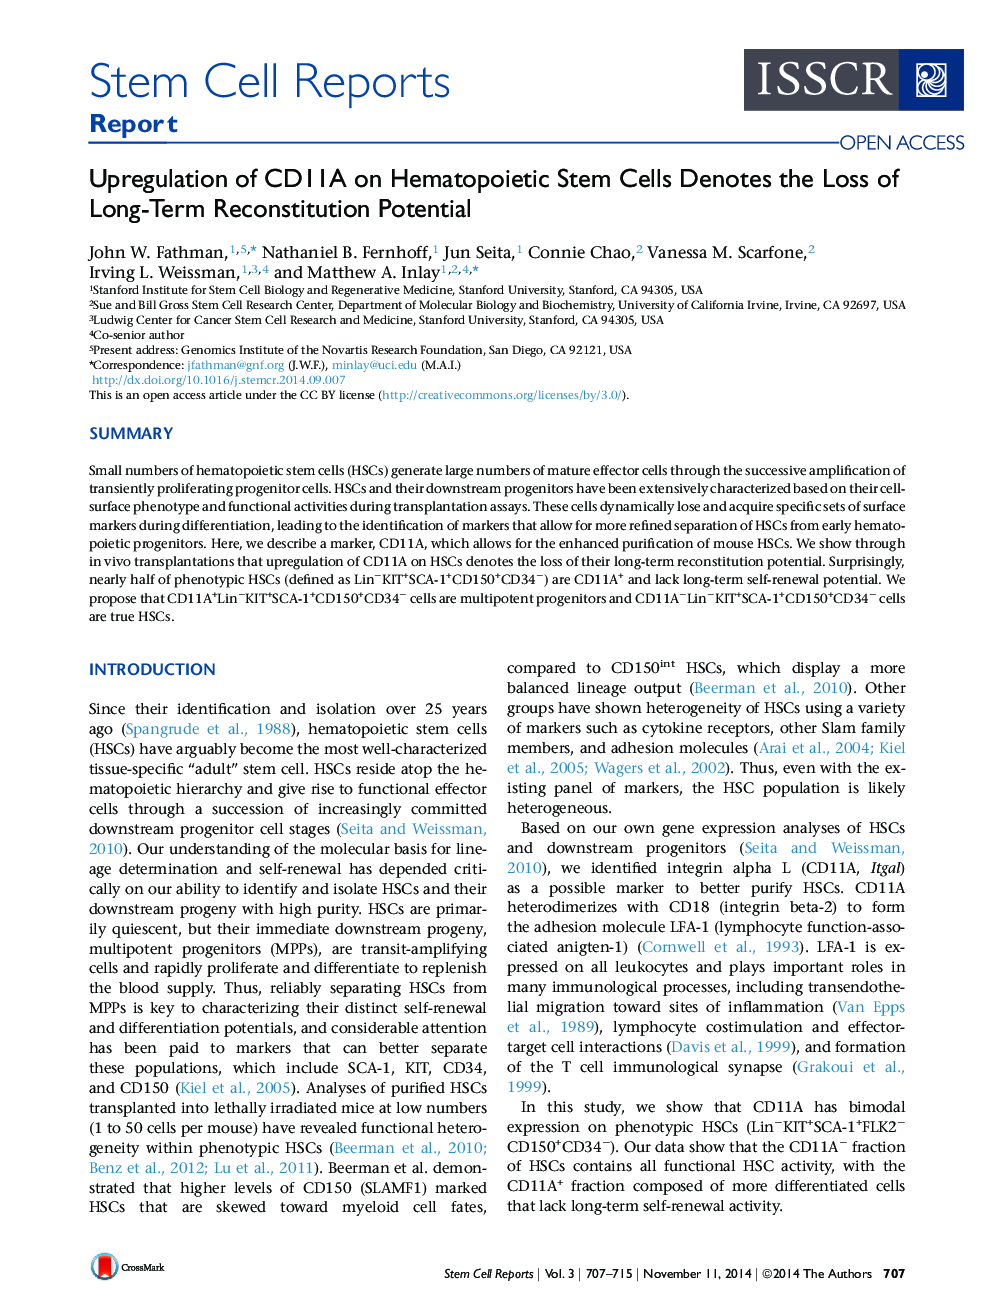 Upregulation of CD11A on Hematopoietic Stem Cells Denotes the Loss of Long-Term Reconstitution Potential 